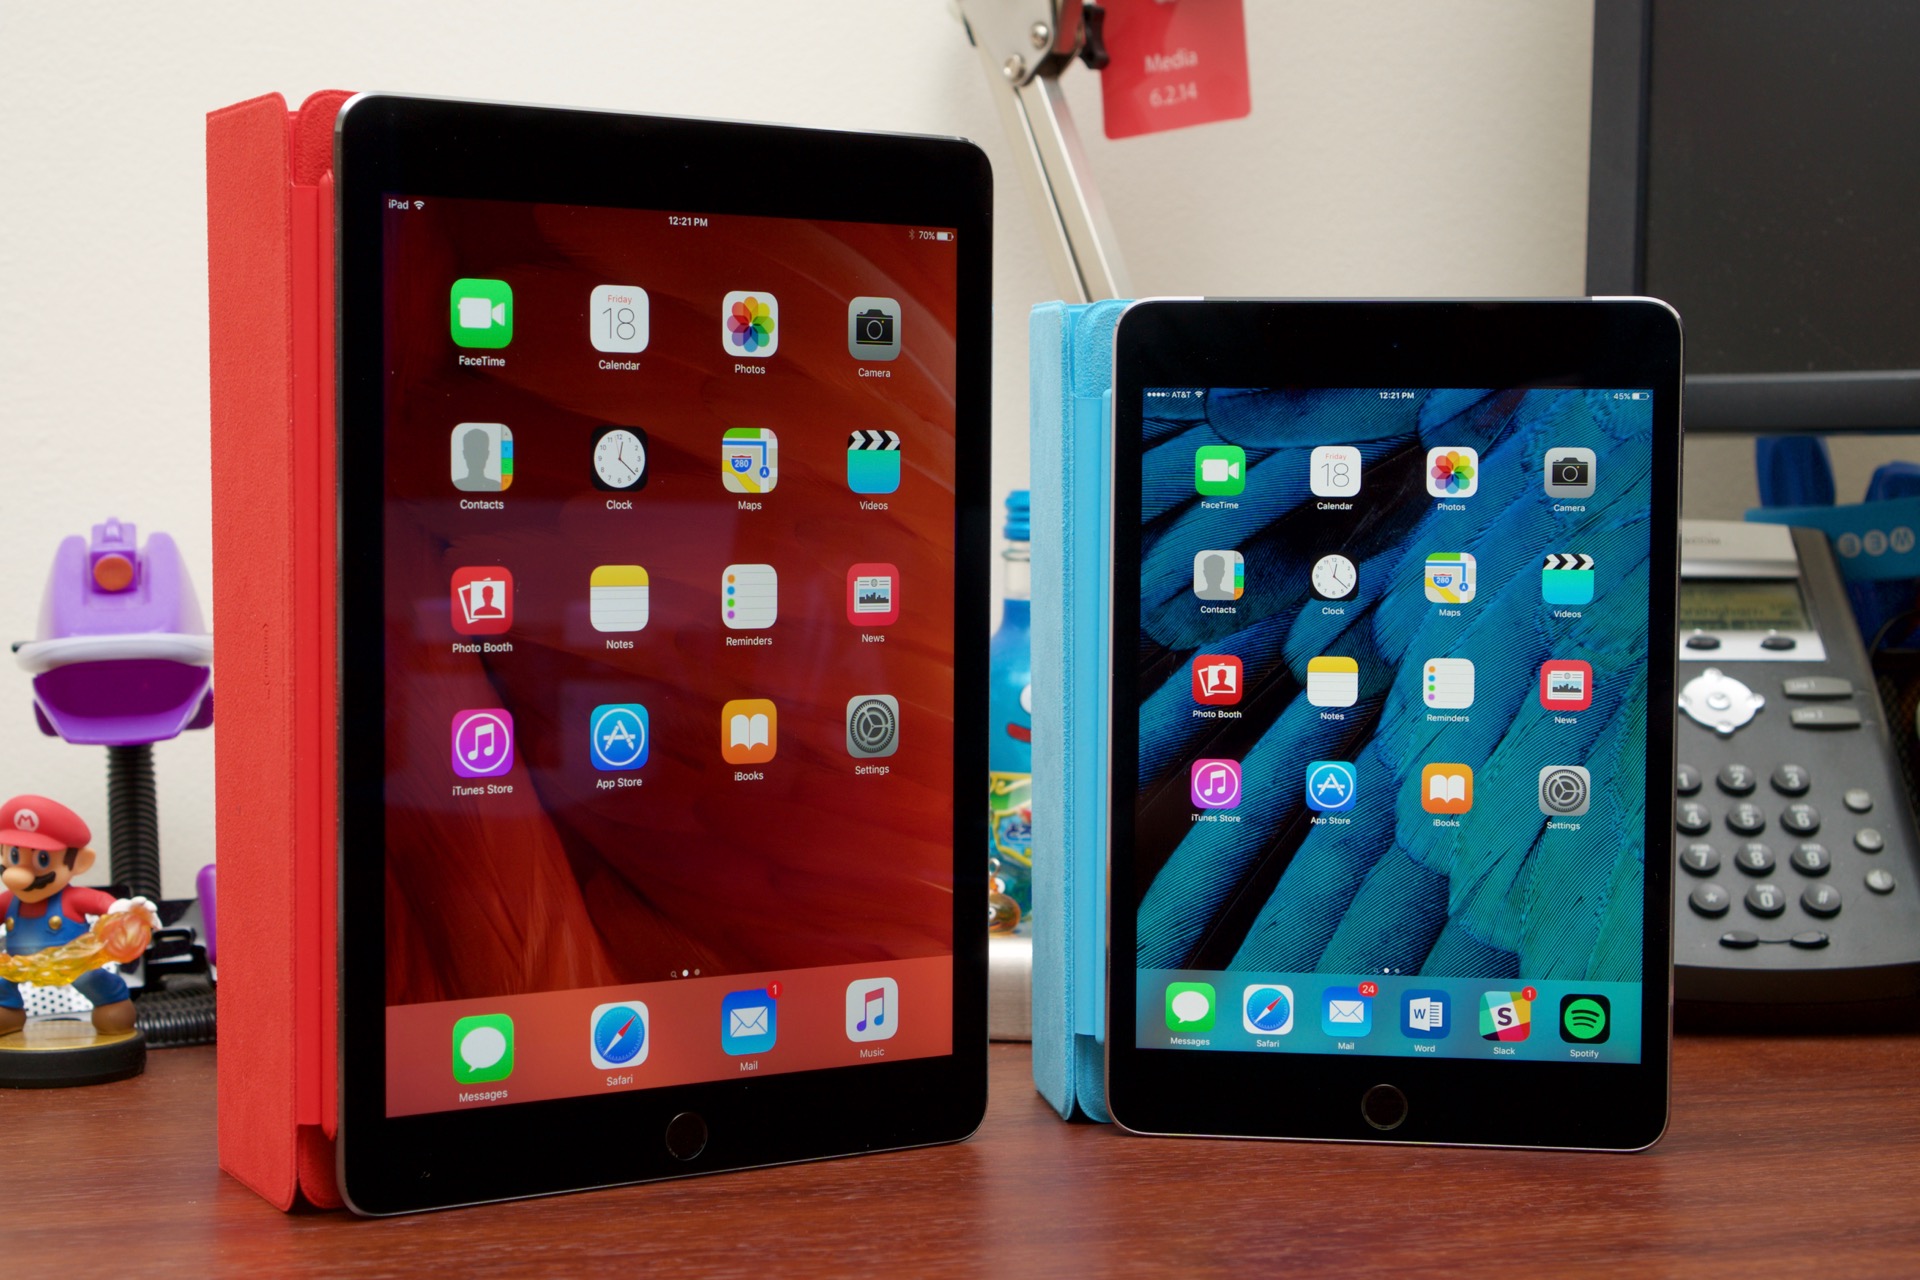 Apple gearing up to release new iPads, iPod Touch soon | Ars Technica